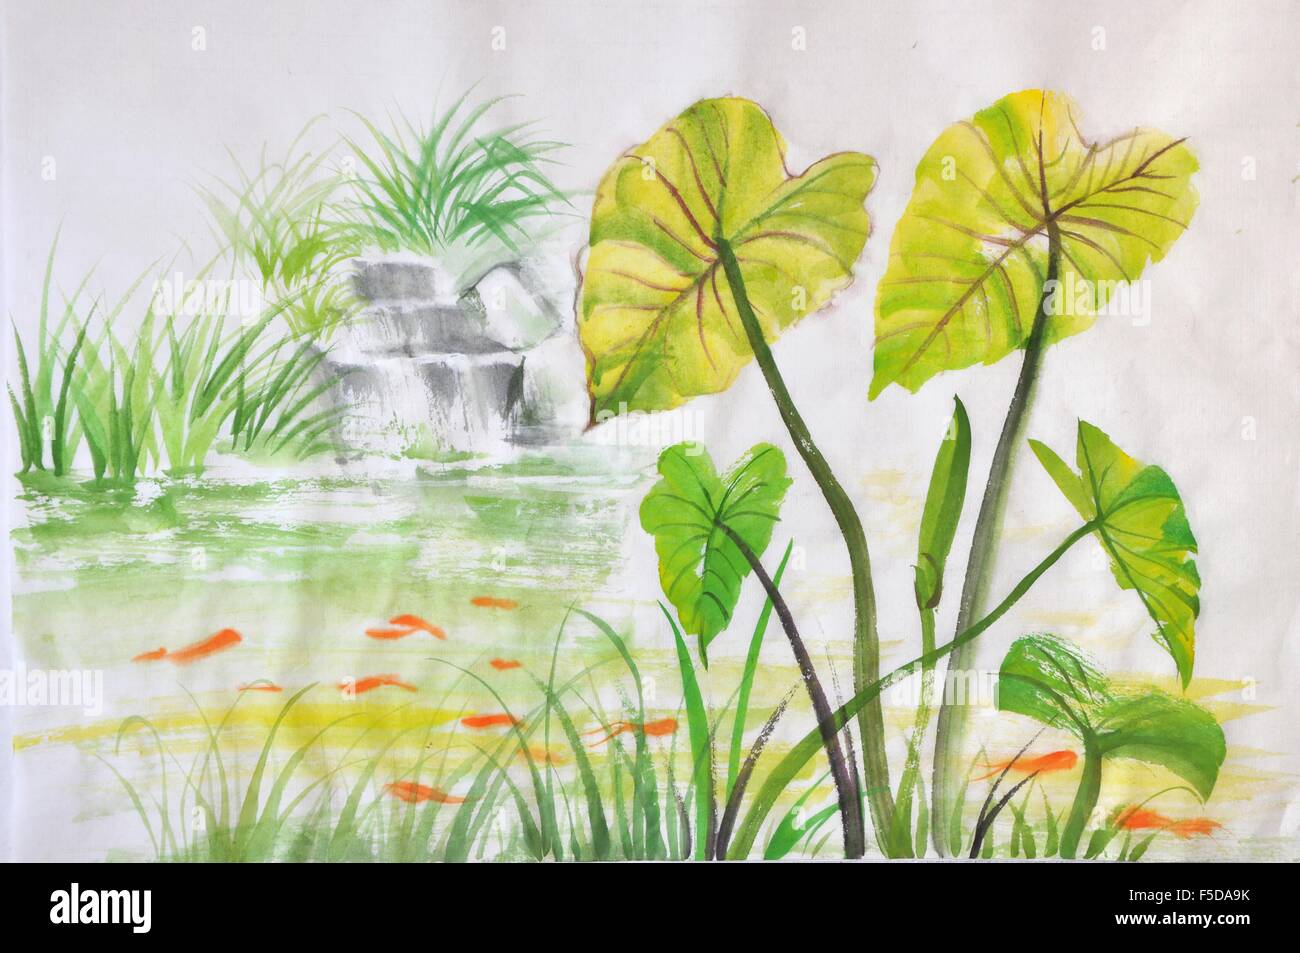 Watercolor painting of green lotus leaves on a pond with red fishes. Asian style original art. Stock Photo